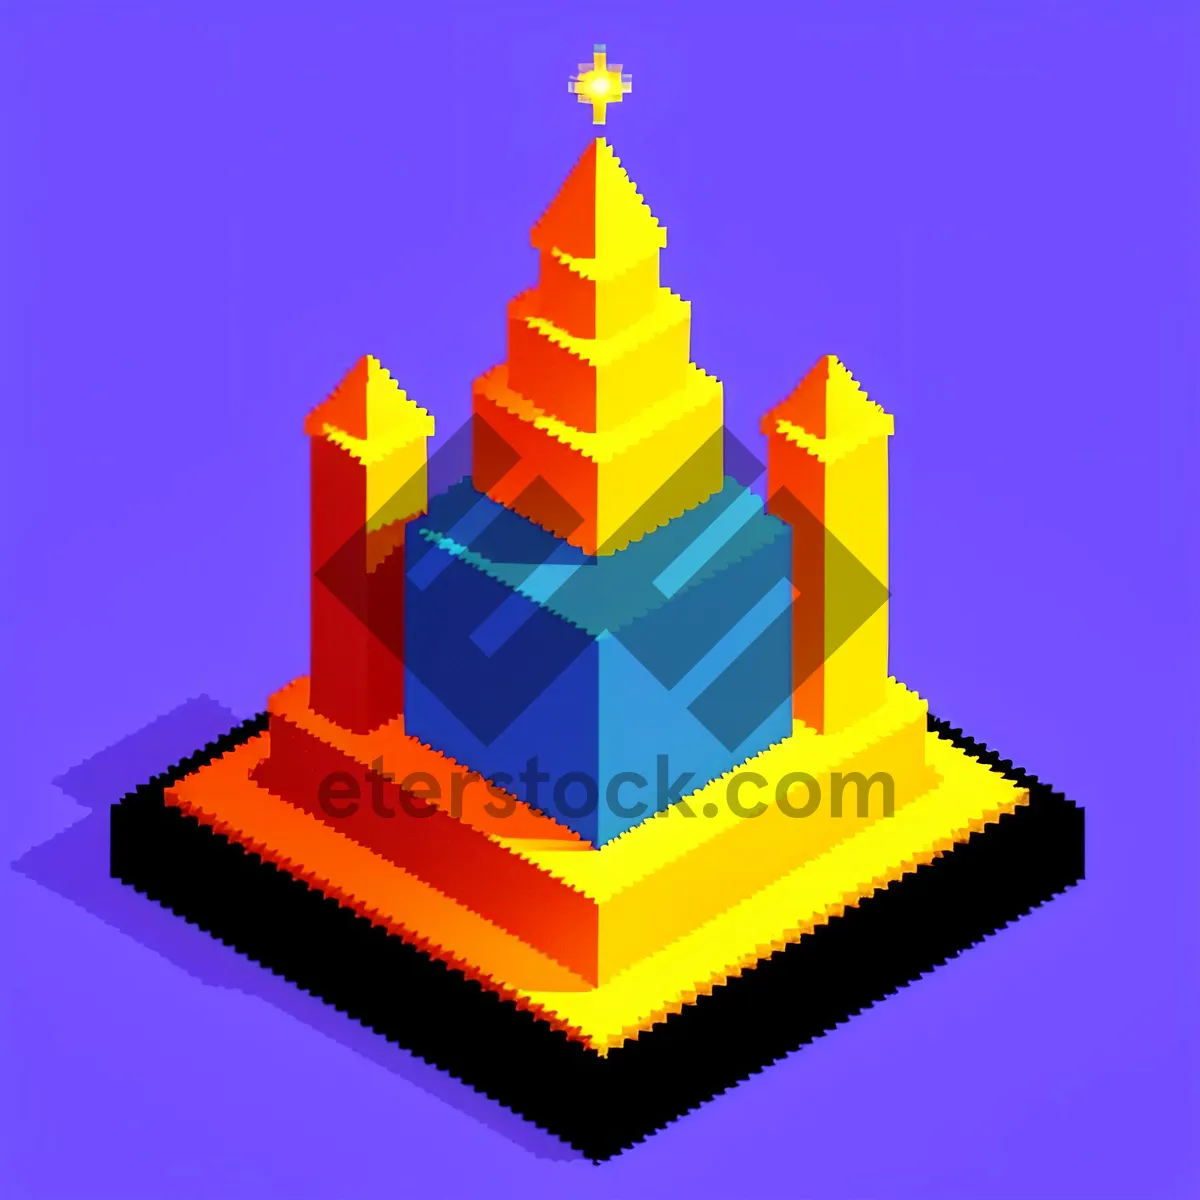 Picture of Golden Pyramid Sign in 3D Box